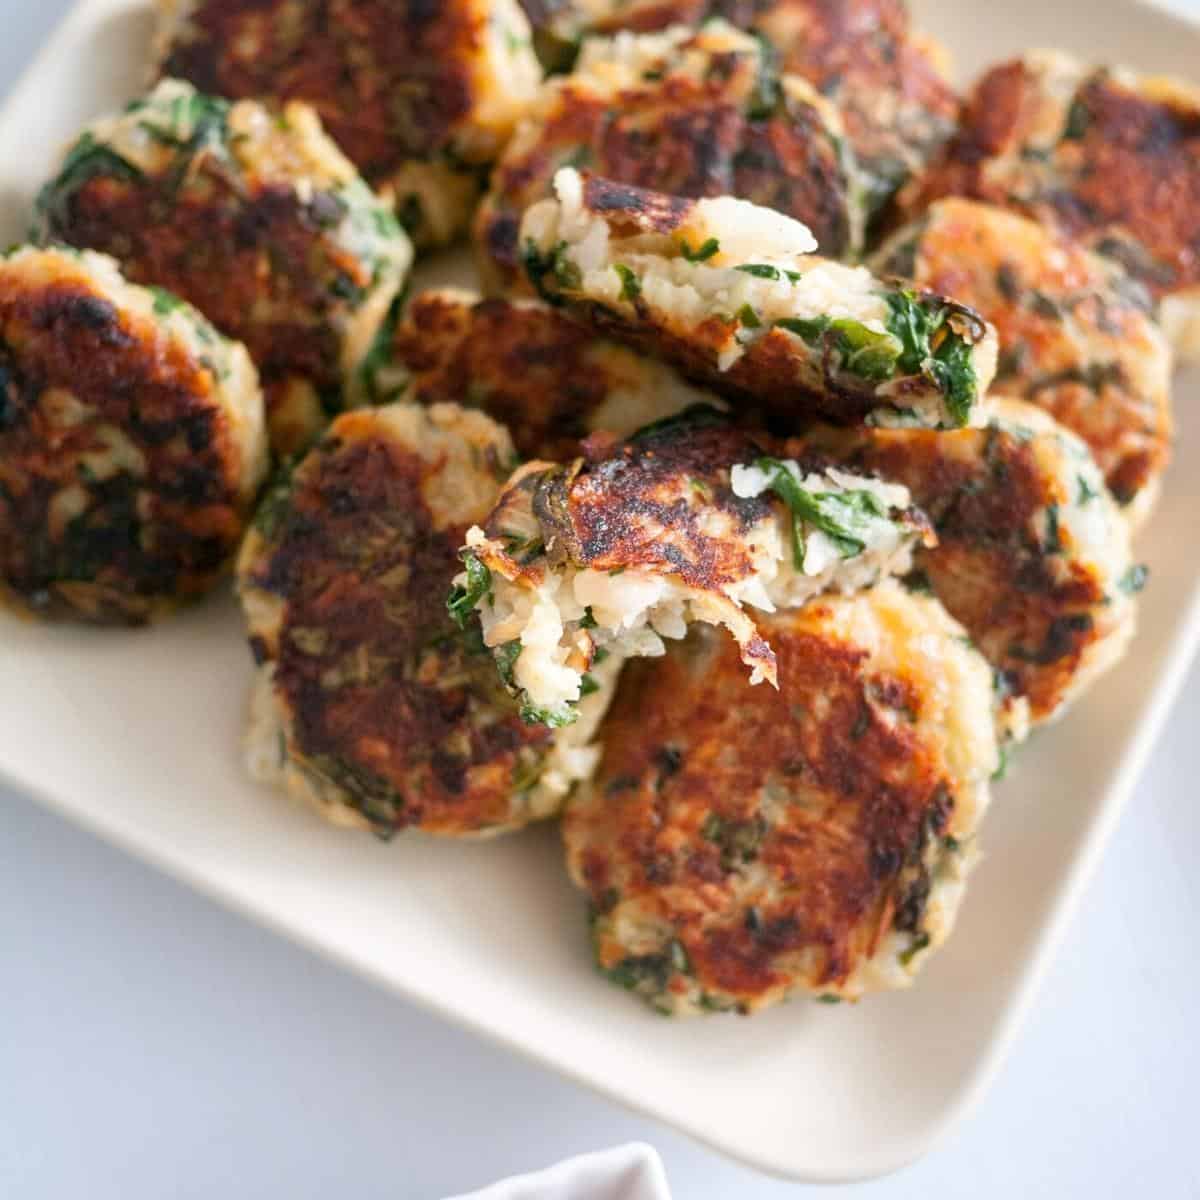 A plate with a Swiss chard patties.